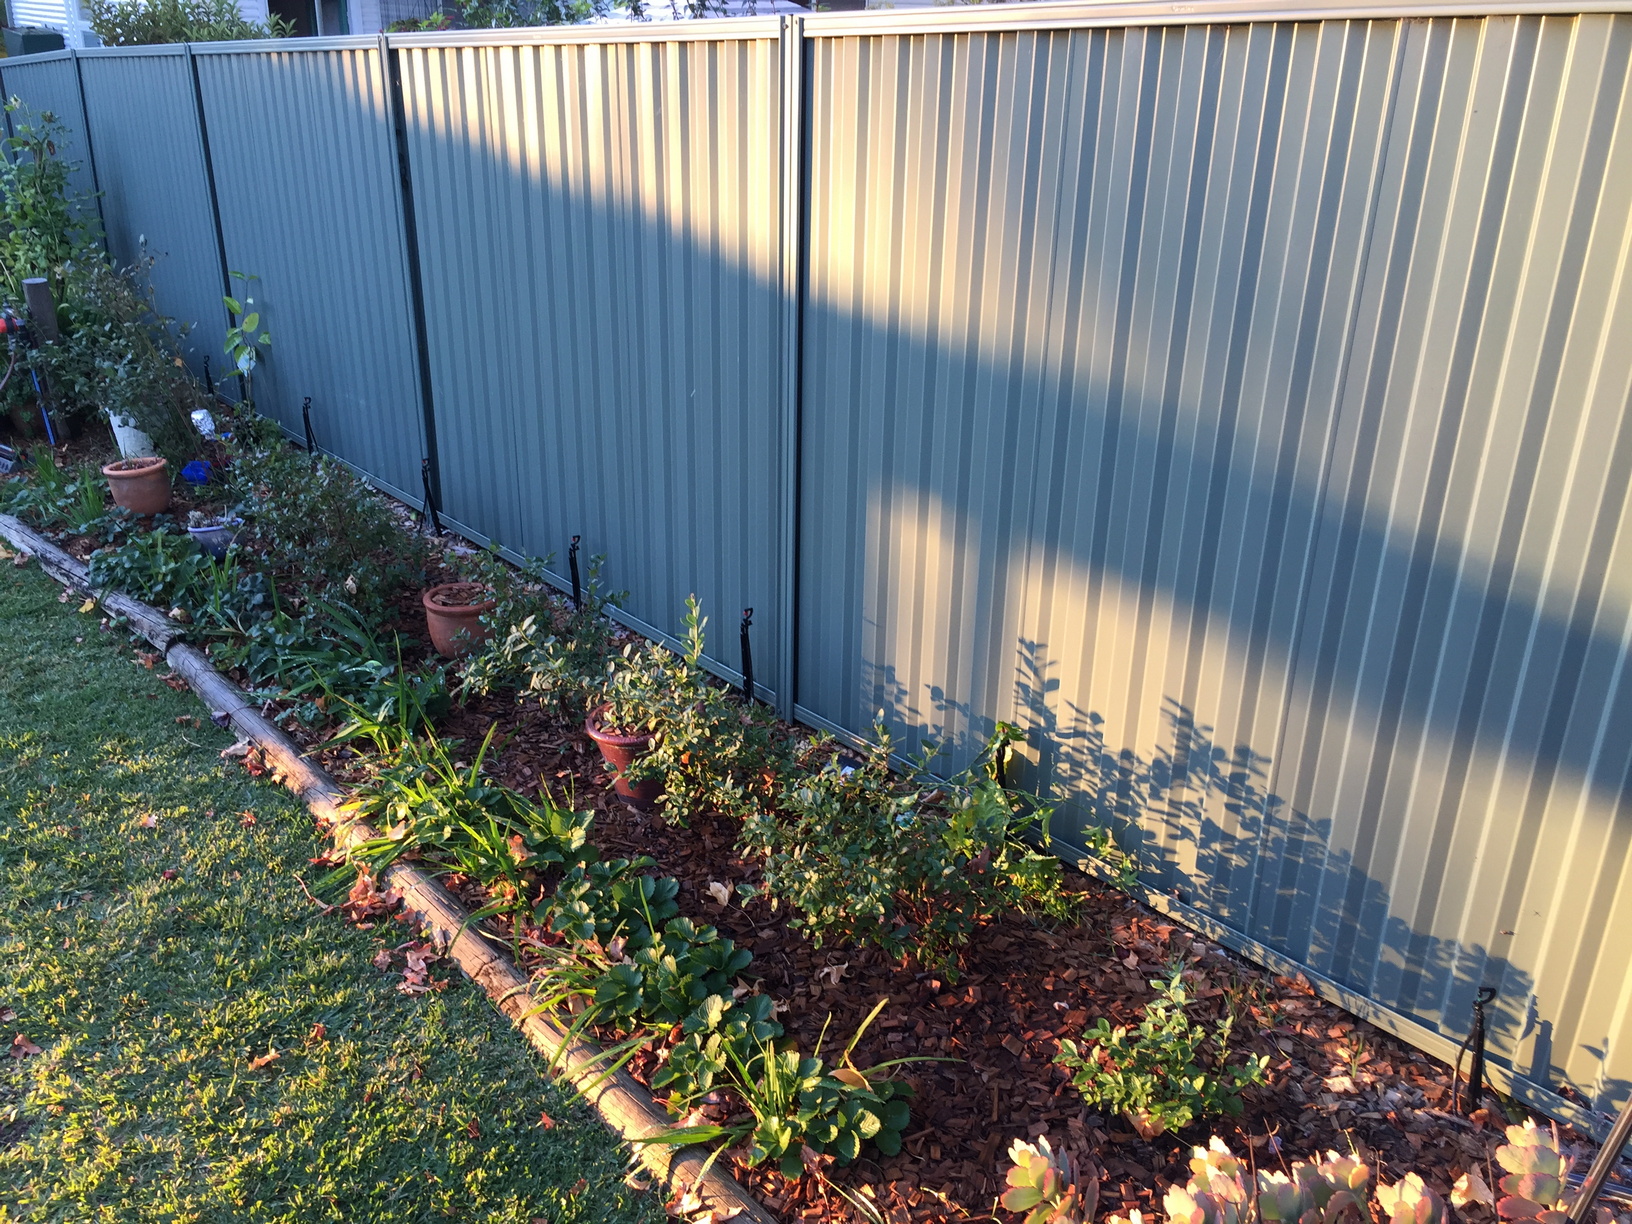 It doesn't look like much now, but down the middle of this bed is the blueberry hedge, with some strawberries near the front, and there a couple of new passionfruits along the fence that will go in shortly. I'll be putting up another trellis, similar to behind the veggie beds on this fence and will train the passionfruit along it. Blueberry plants can get to between 1-2 meters tall, so I'm hoping for a solid hedge of blueberries one day. I've also planted some more wheat between the blueberries and the fence.